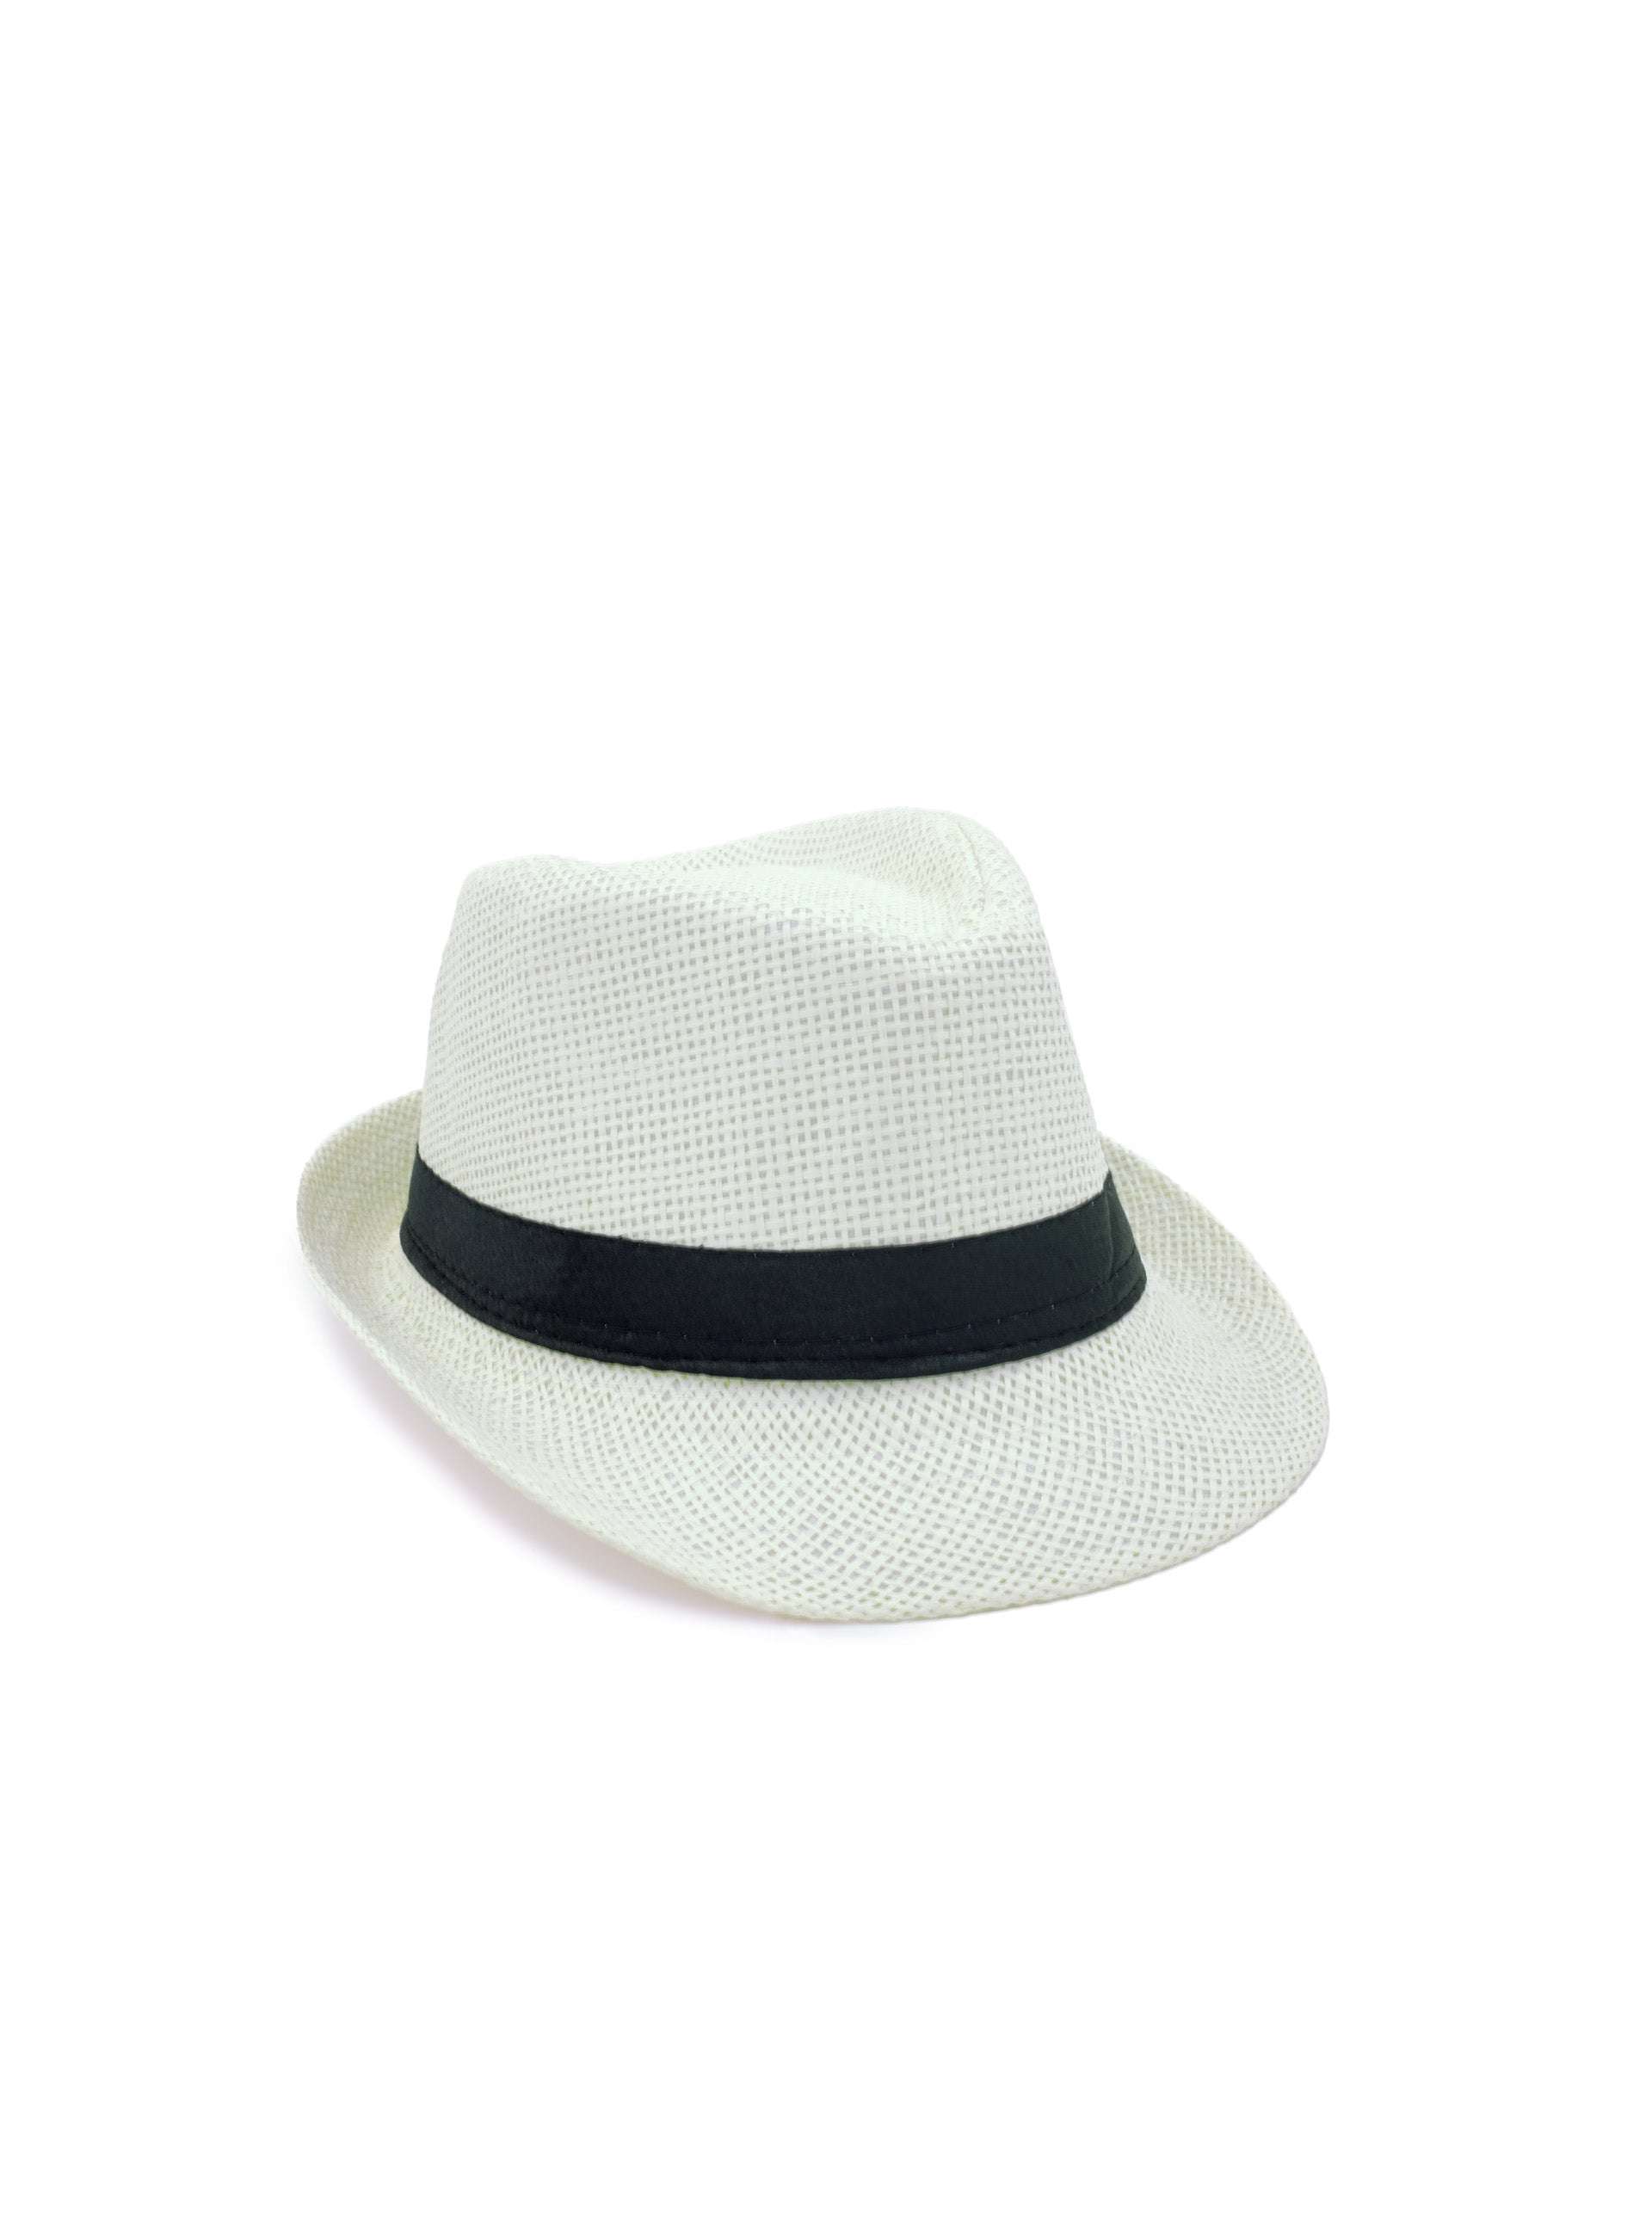 off white fedora hat with black band